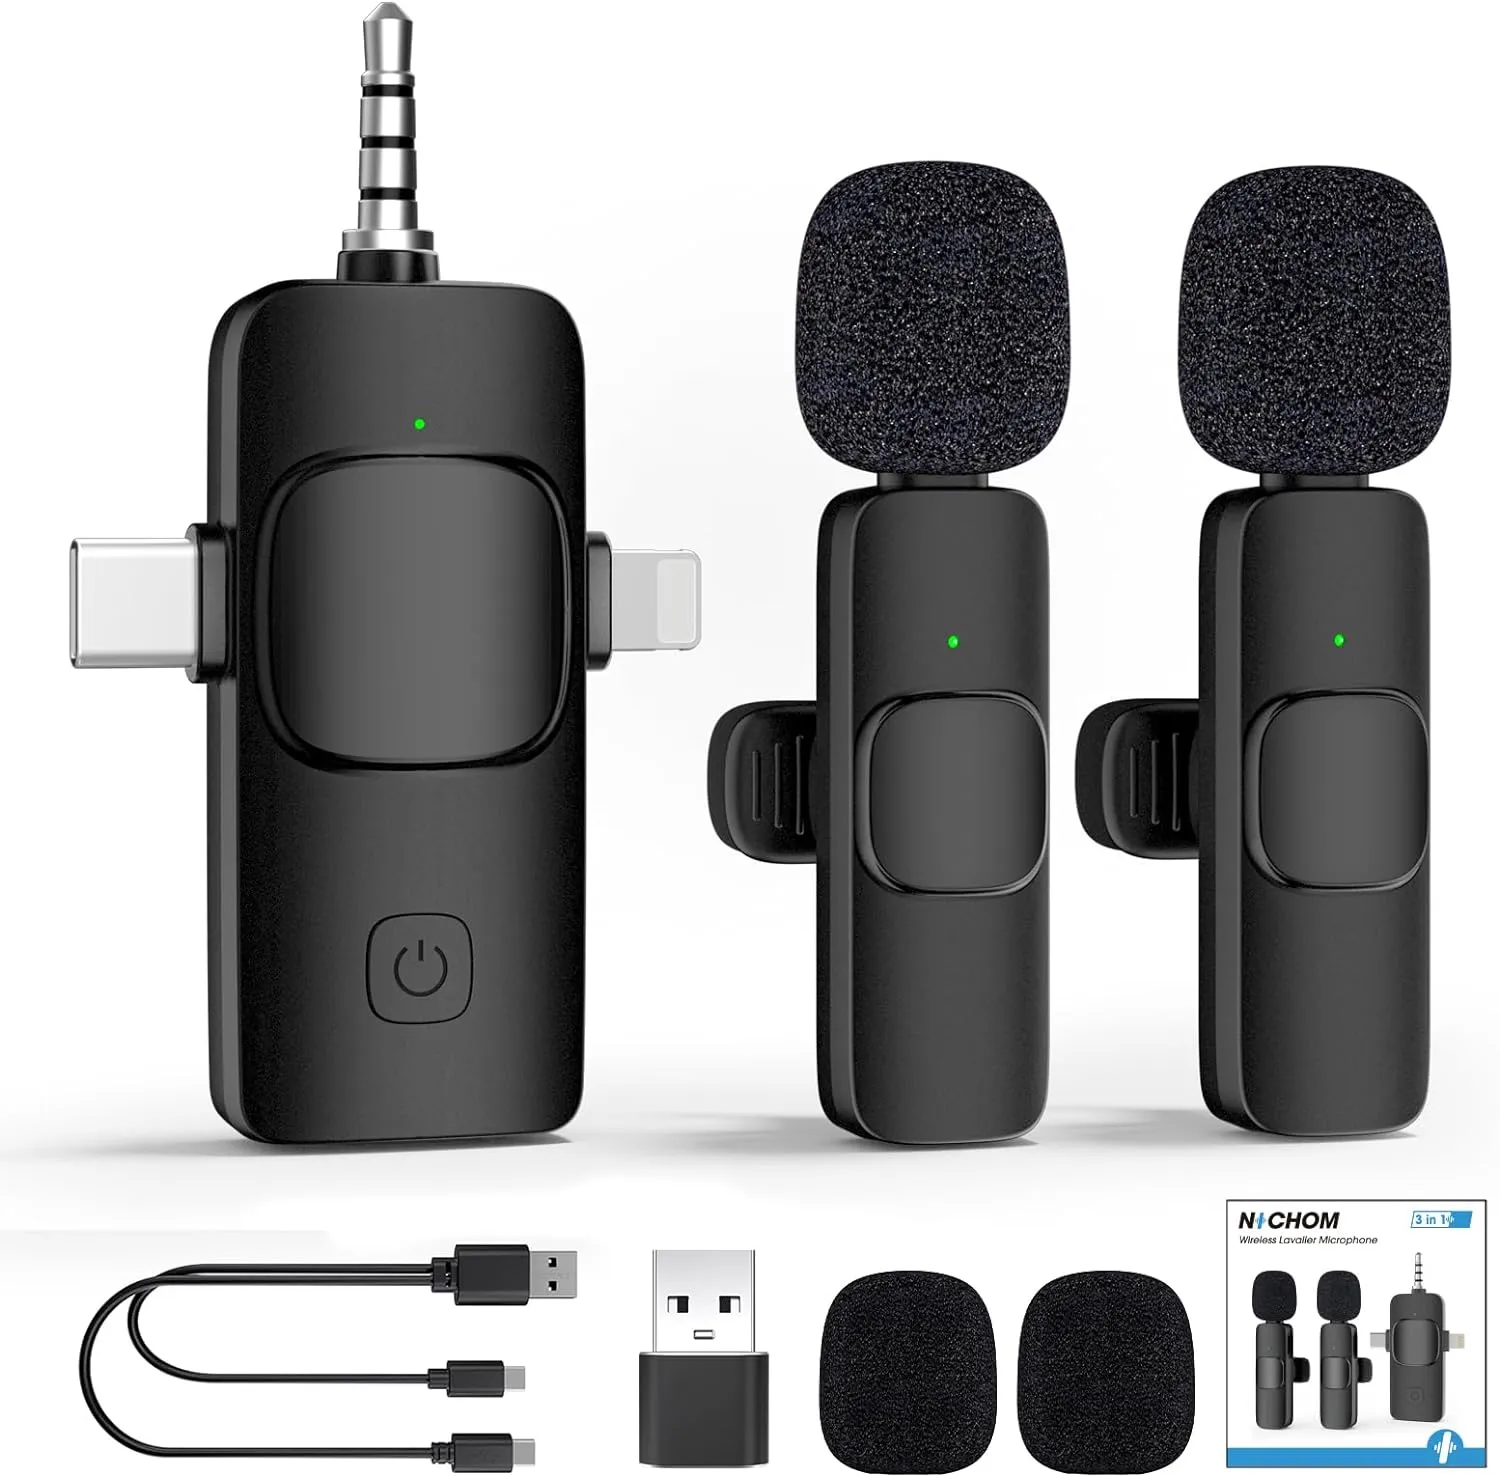 NICHOM 3 in 1 Wireless Microphone for iPhone, iPad, Android, Camera, Mini Microphones USB C, 12Hs Working Time, Lavalier Mic